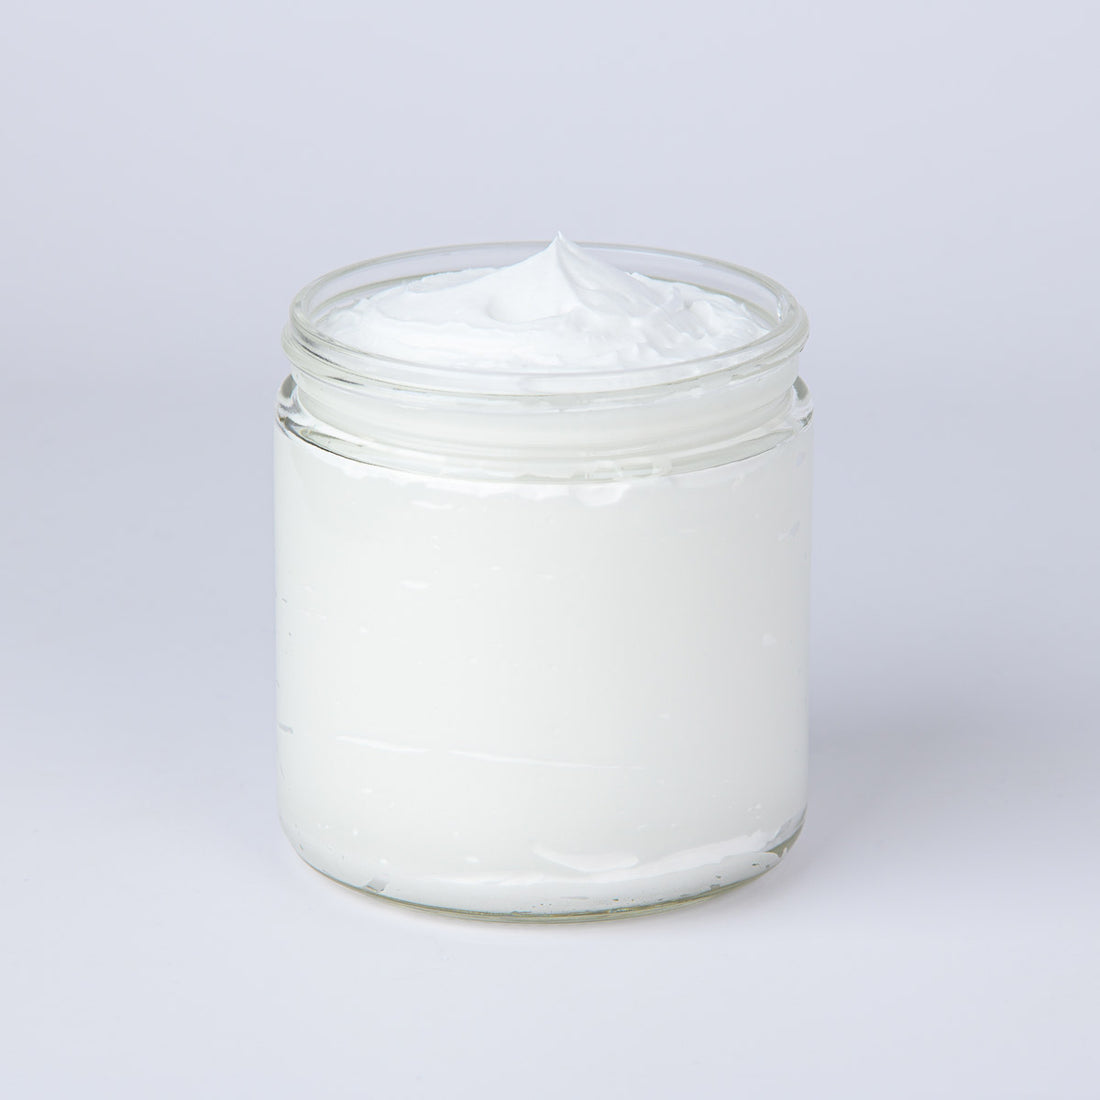 Lavender Whipped Tallow - All Natural Grass Fed Beef Tallow Moisturizer